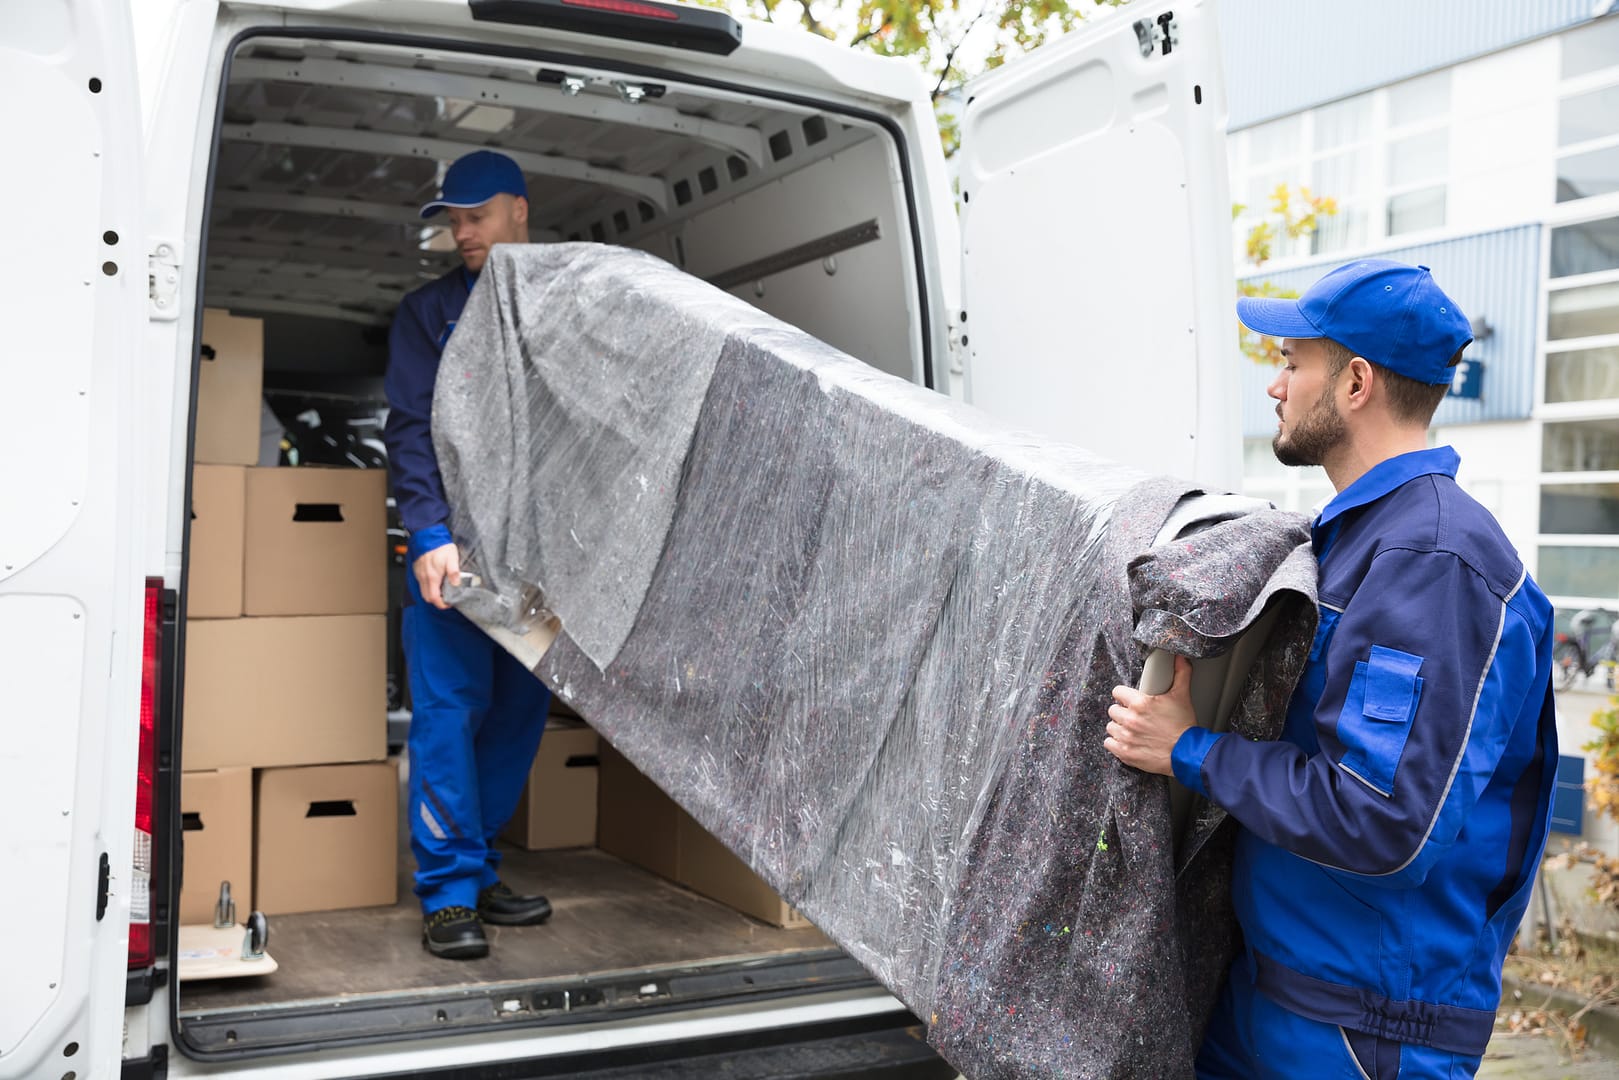 removals service